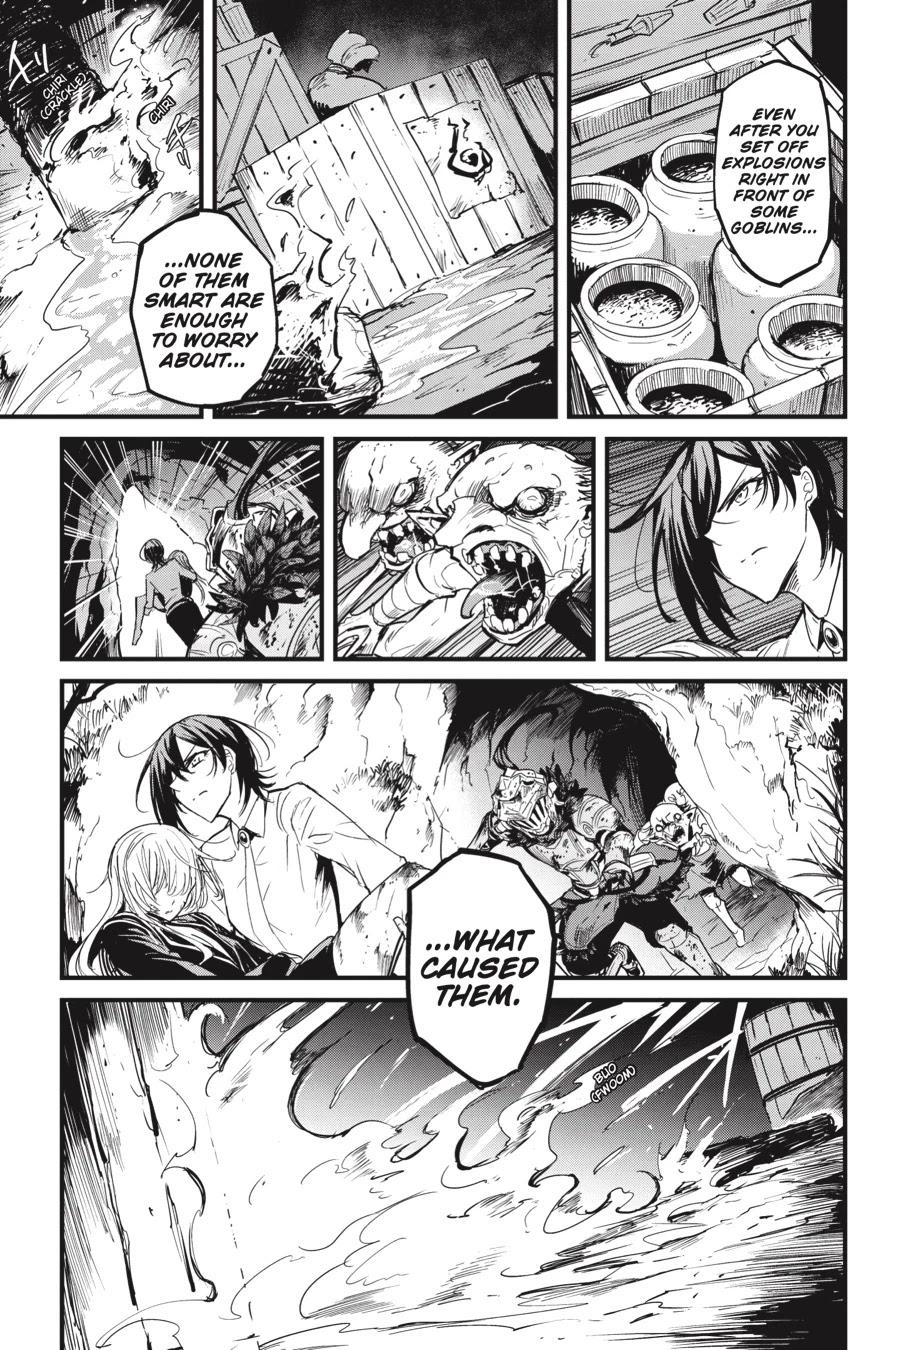 Goblin Slayer: Side Story Year One chapter 73